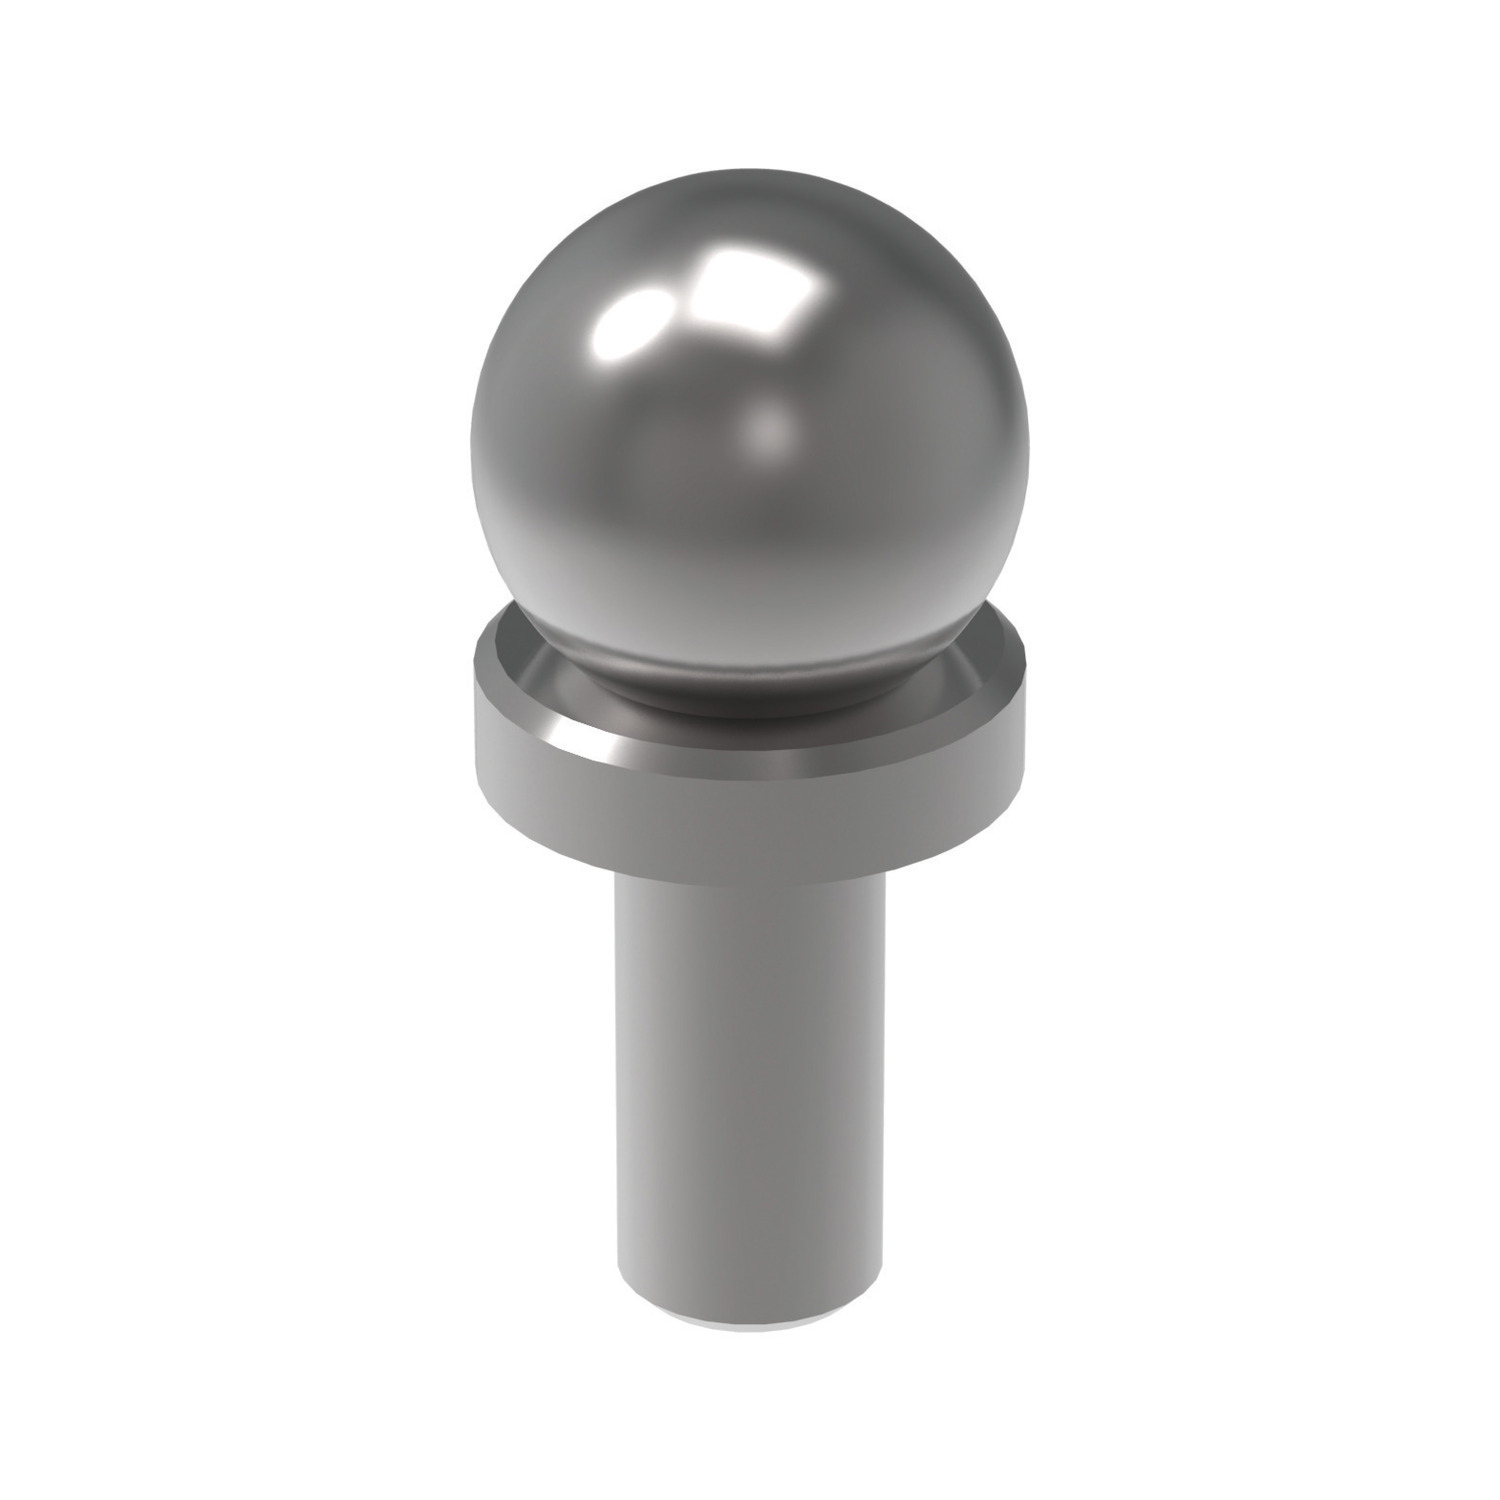 Precision Balls - Imperial Imperial precision balls with slip-fit and shouldered design. Made from hardened and ground steel.